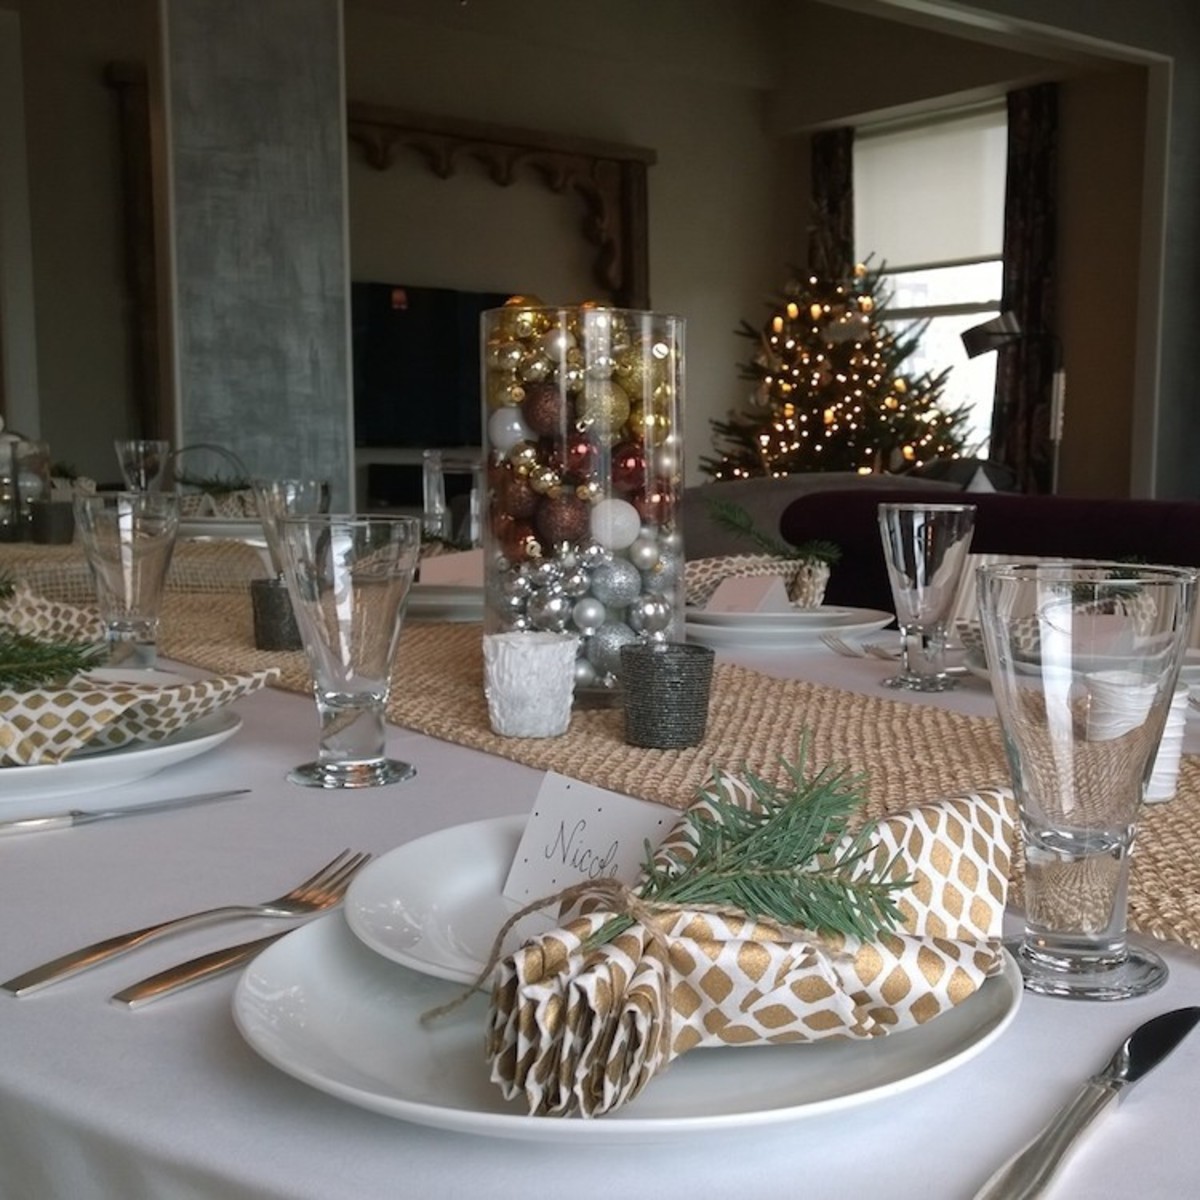 Setting a gold tablescape